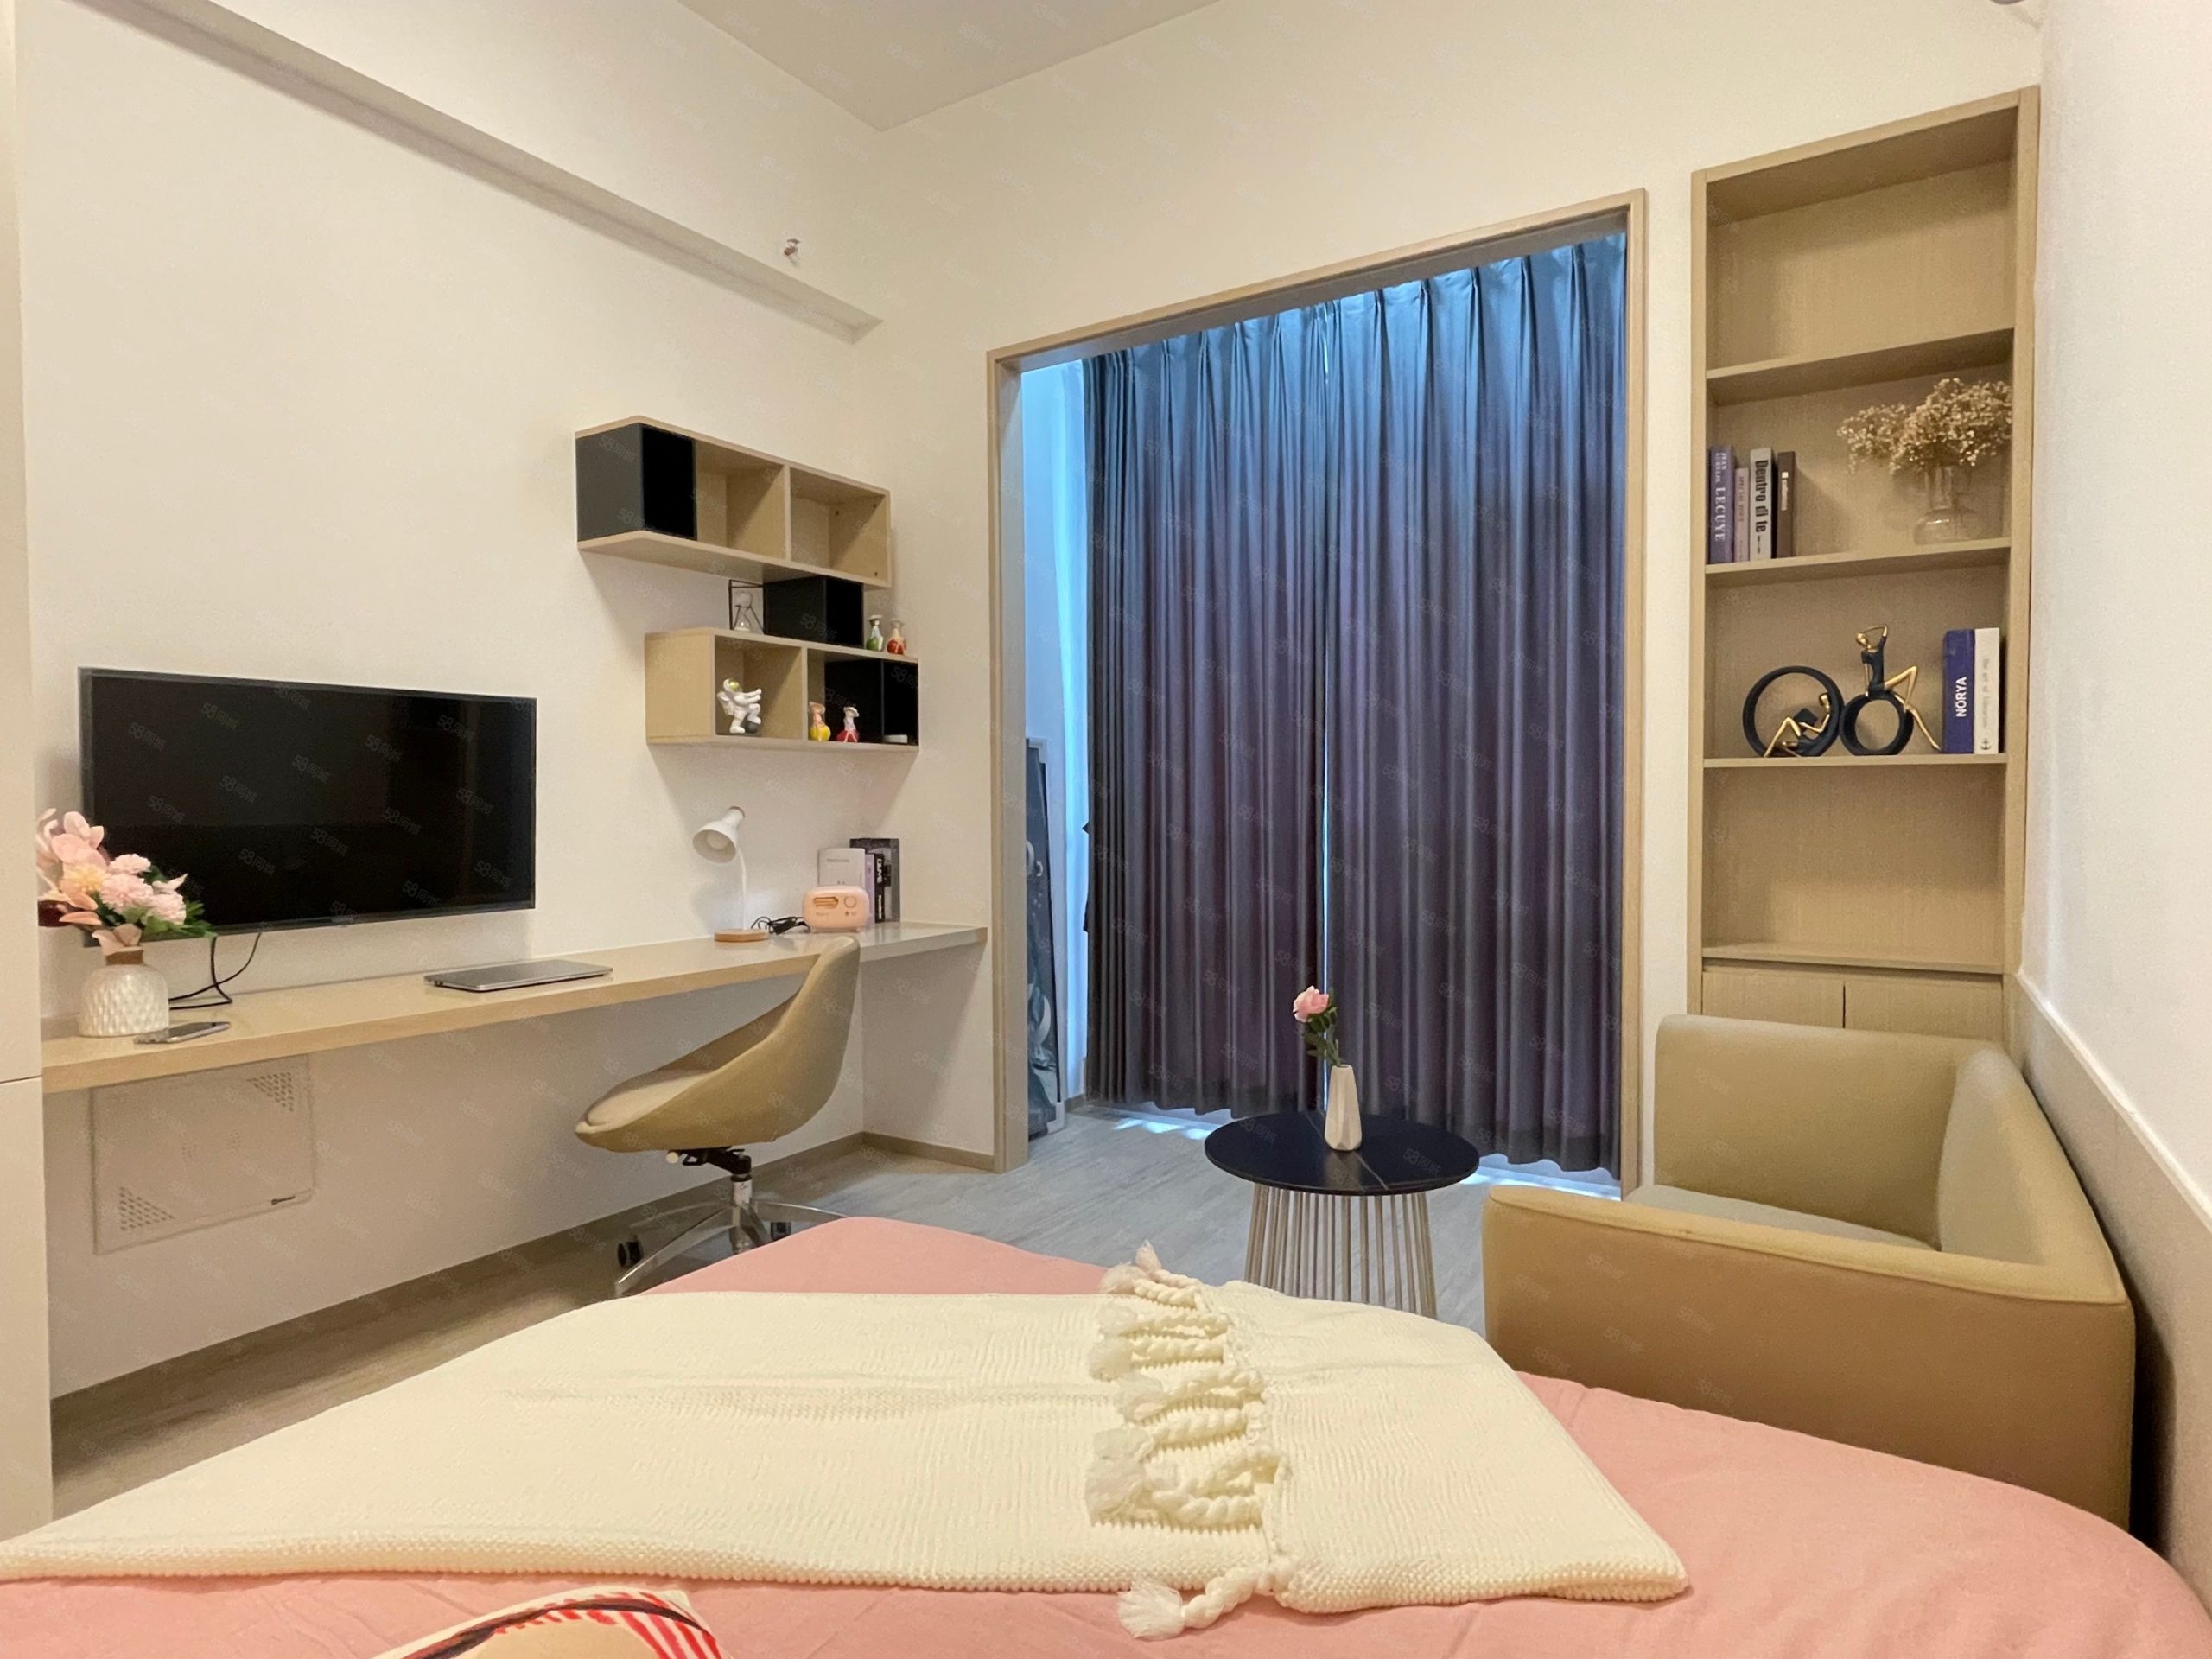 Featured image for “NICE One bedroom for rent in Futian area”